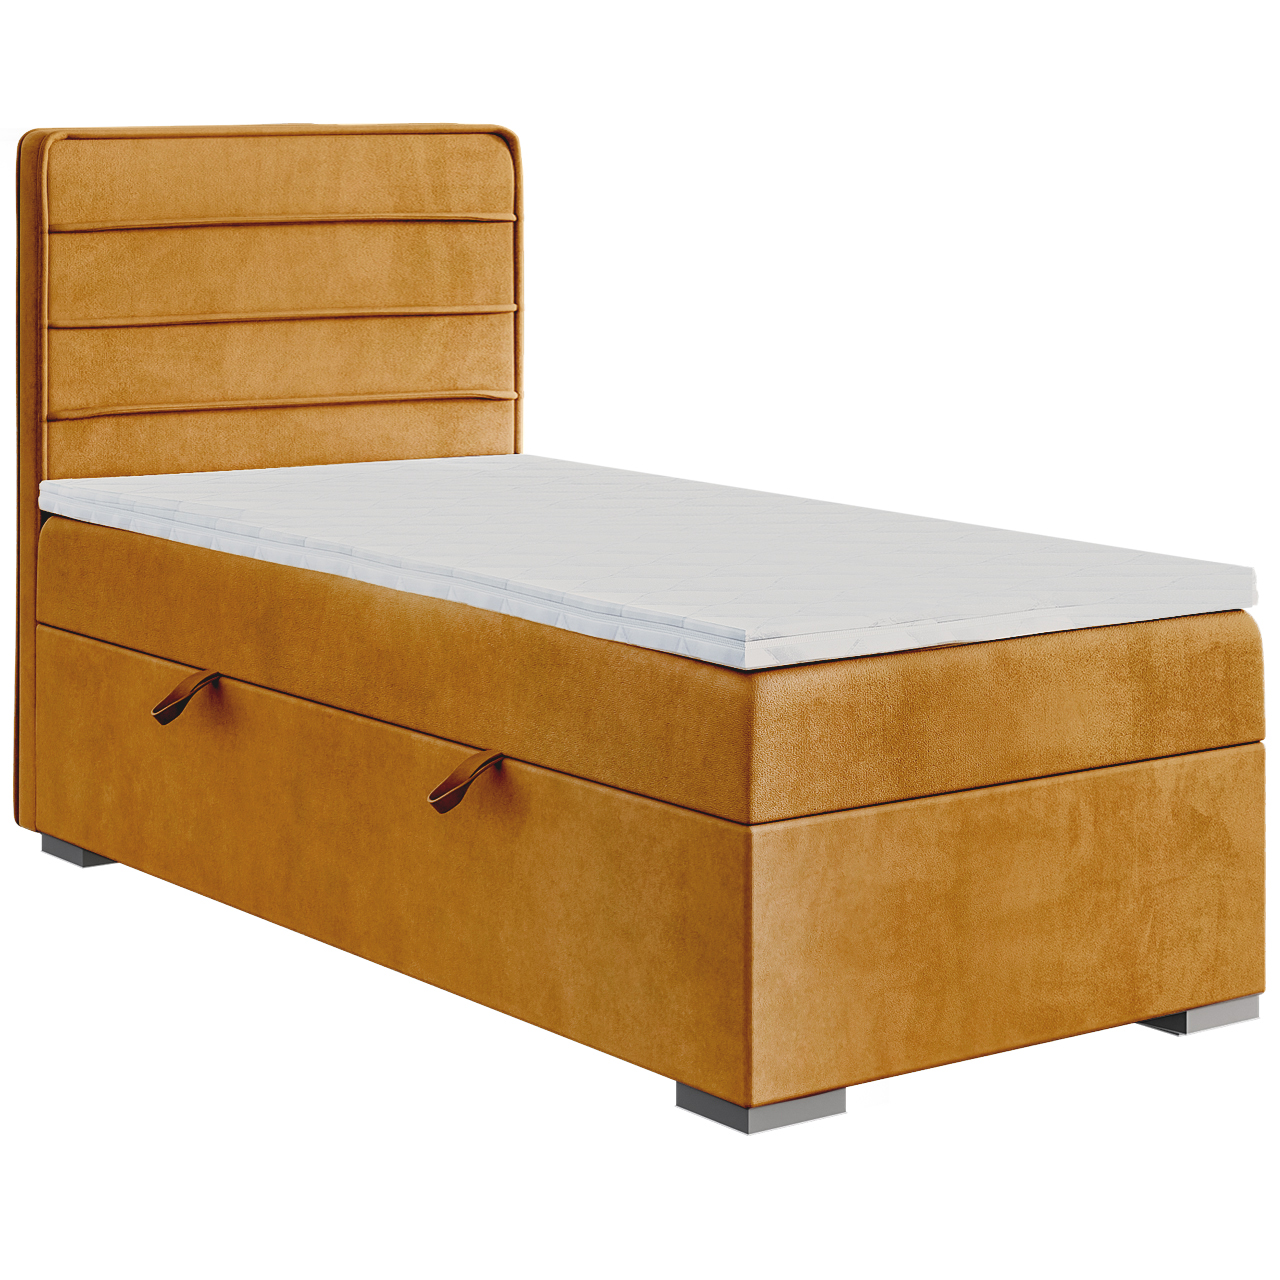 Upholstered bed BEROTTI 90x200 right riviera 41